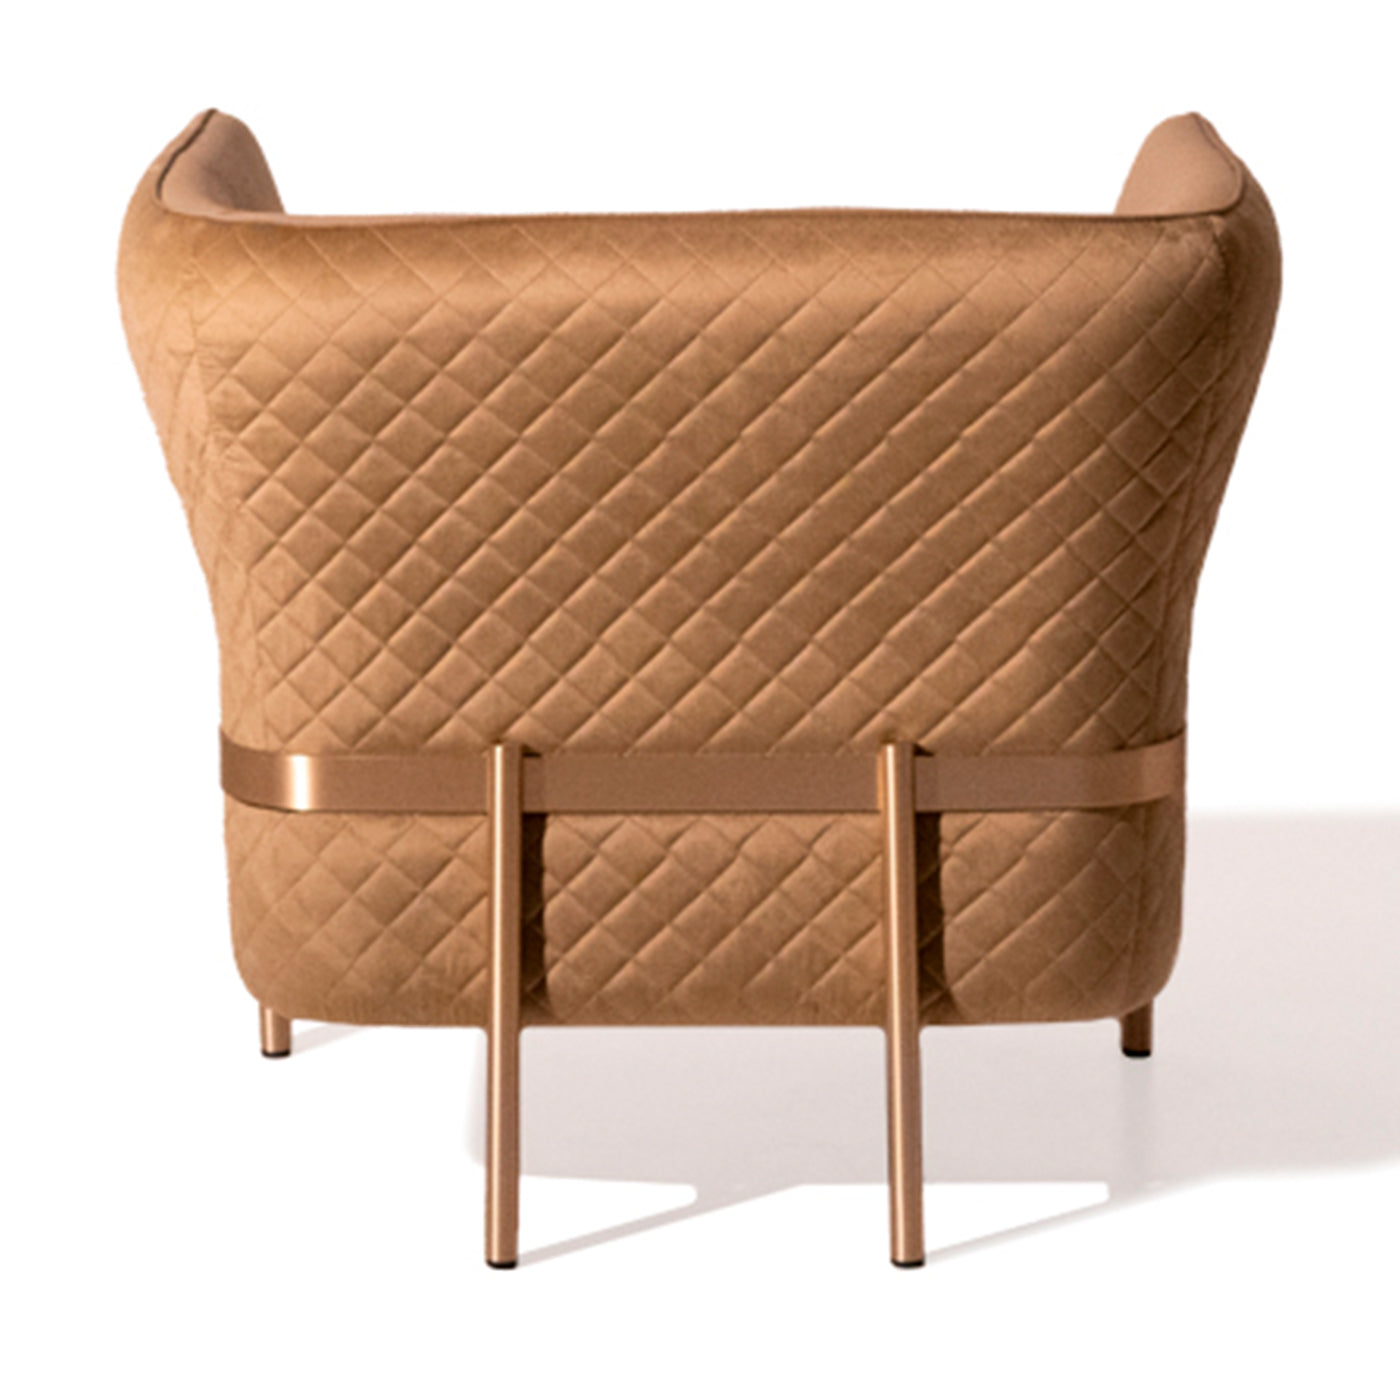 Universal Armchair by Marco and Giulio Mantellassi - Alternative view 2